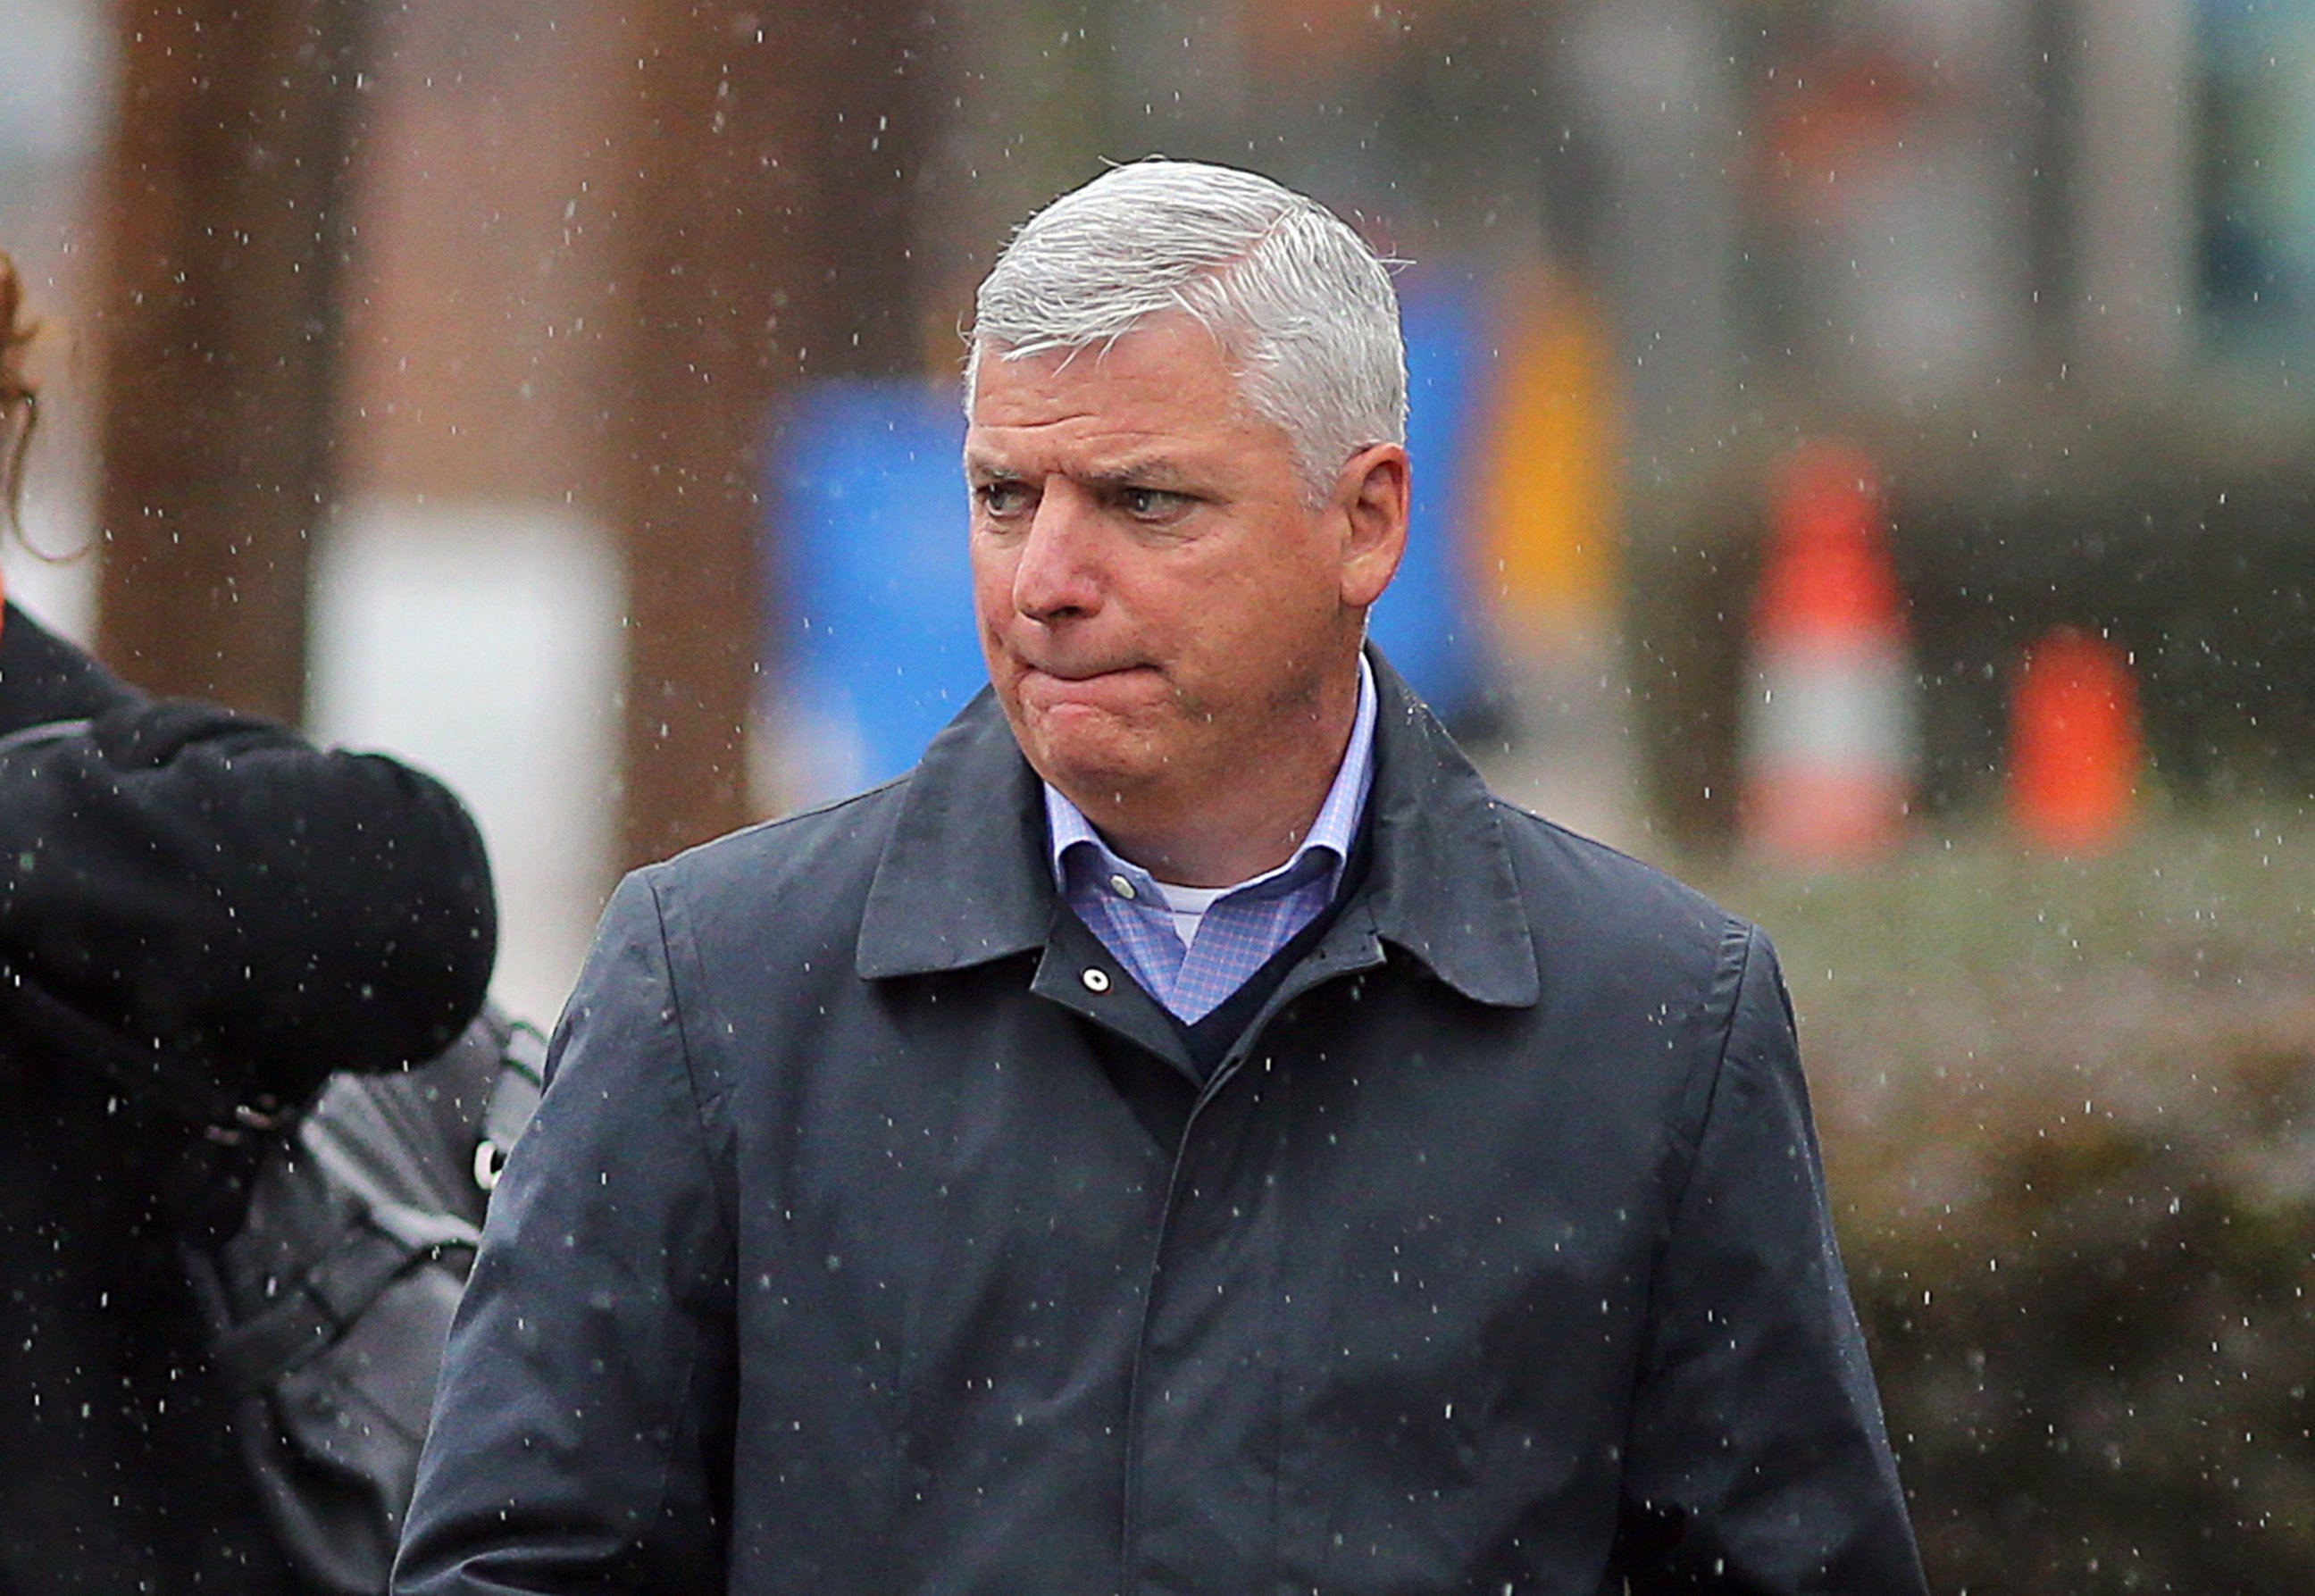 PHOTO: District Attorney Dan Conley leaves the Caggiano Funeral Home in the rain on Nov. 28, 2015, in Winthrop, Mass.